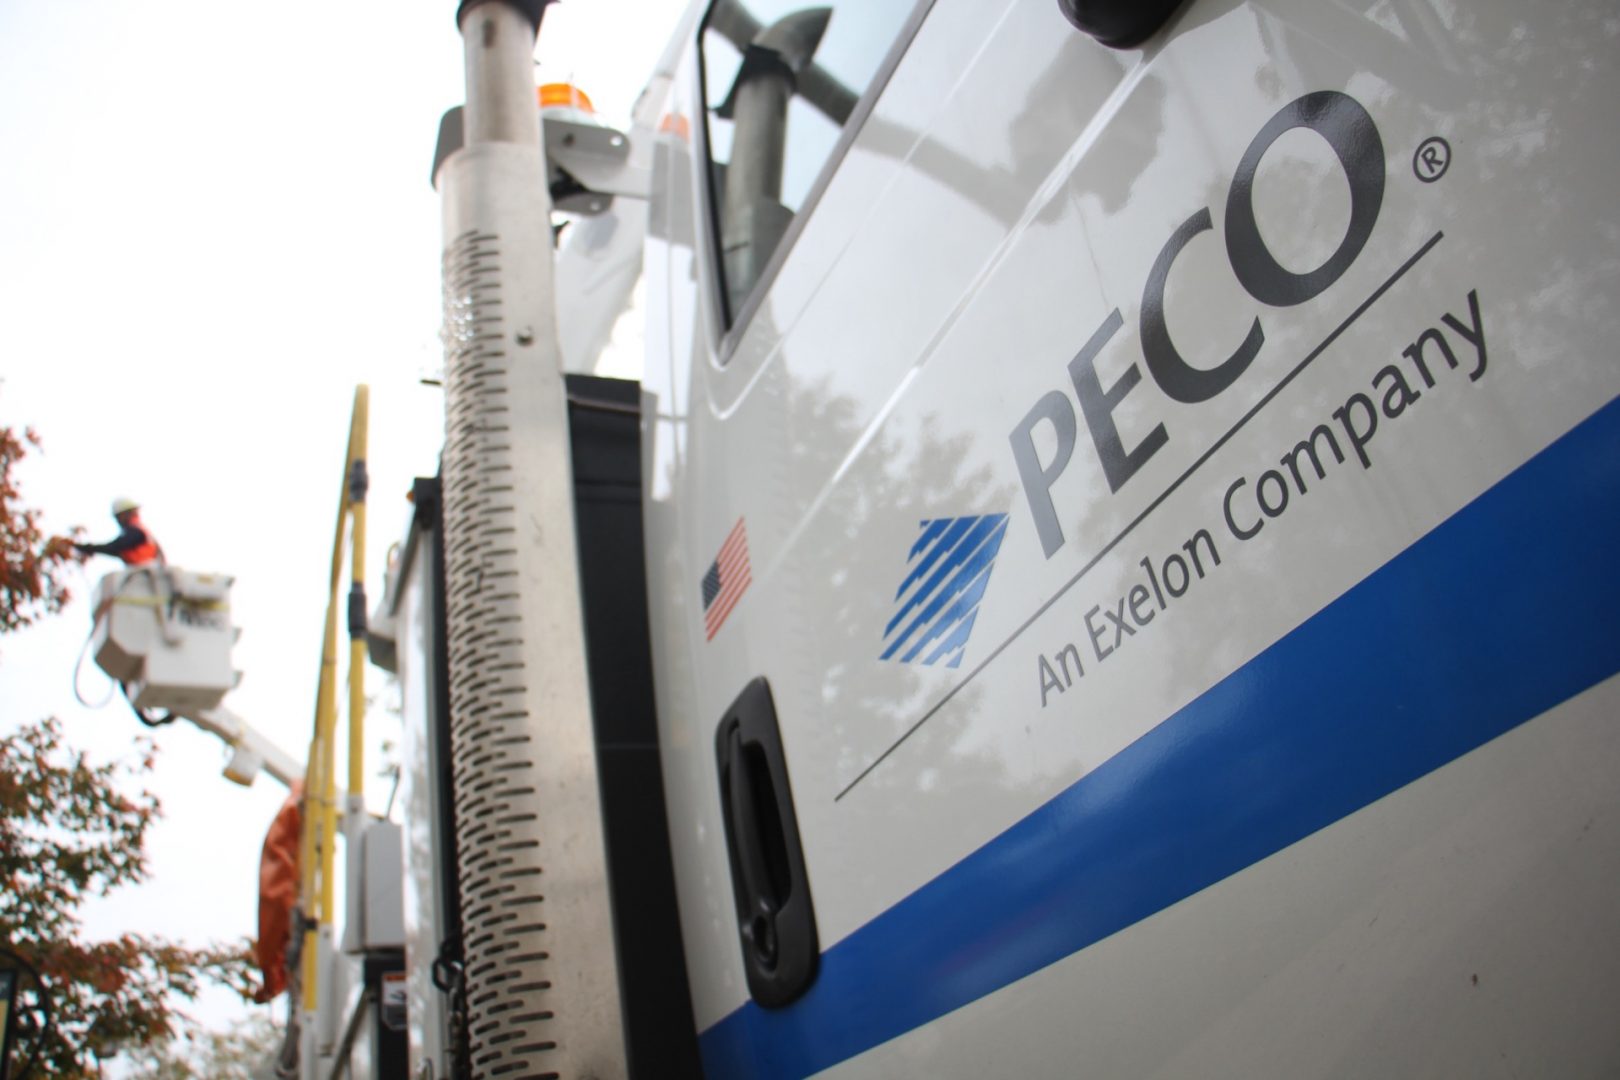 PECO truck in the foreground, PECO worker in the background.